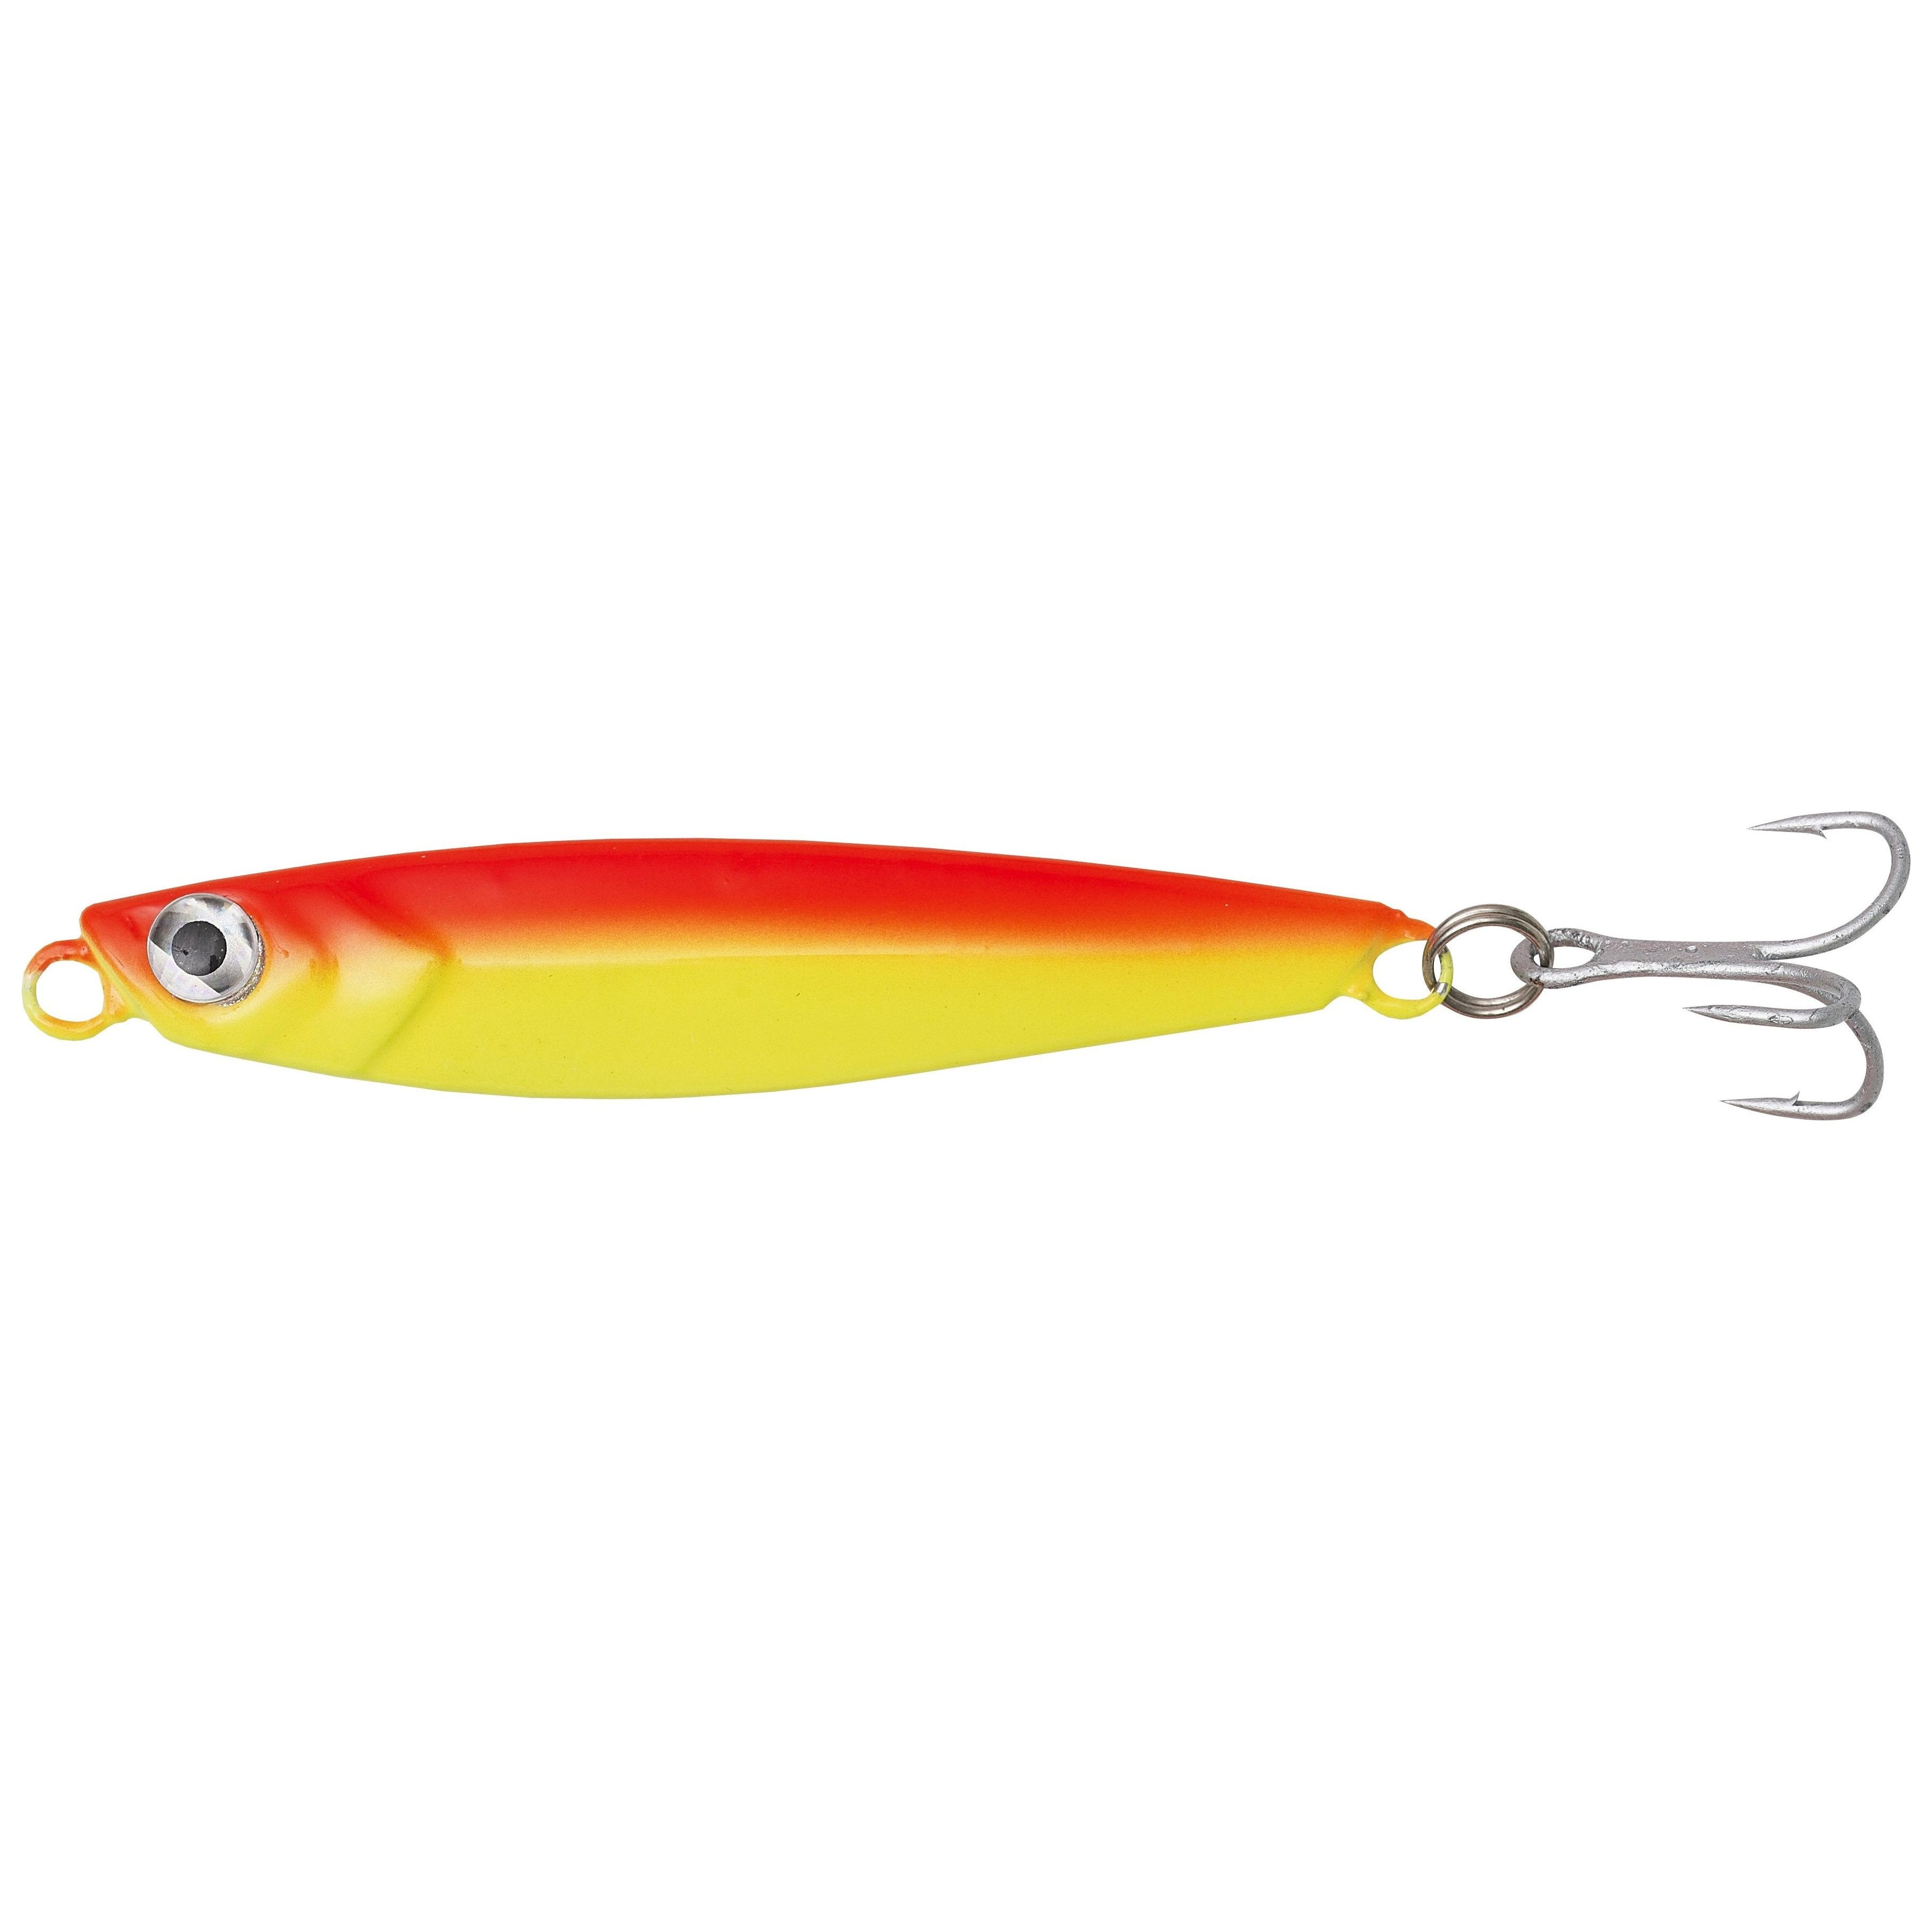 E202-181-134 KINETIC COOL HERRING 2PK 40G ORANGE/YELLOW AT TED JOHNSONS PROBLEM SOLVED